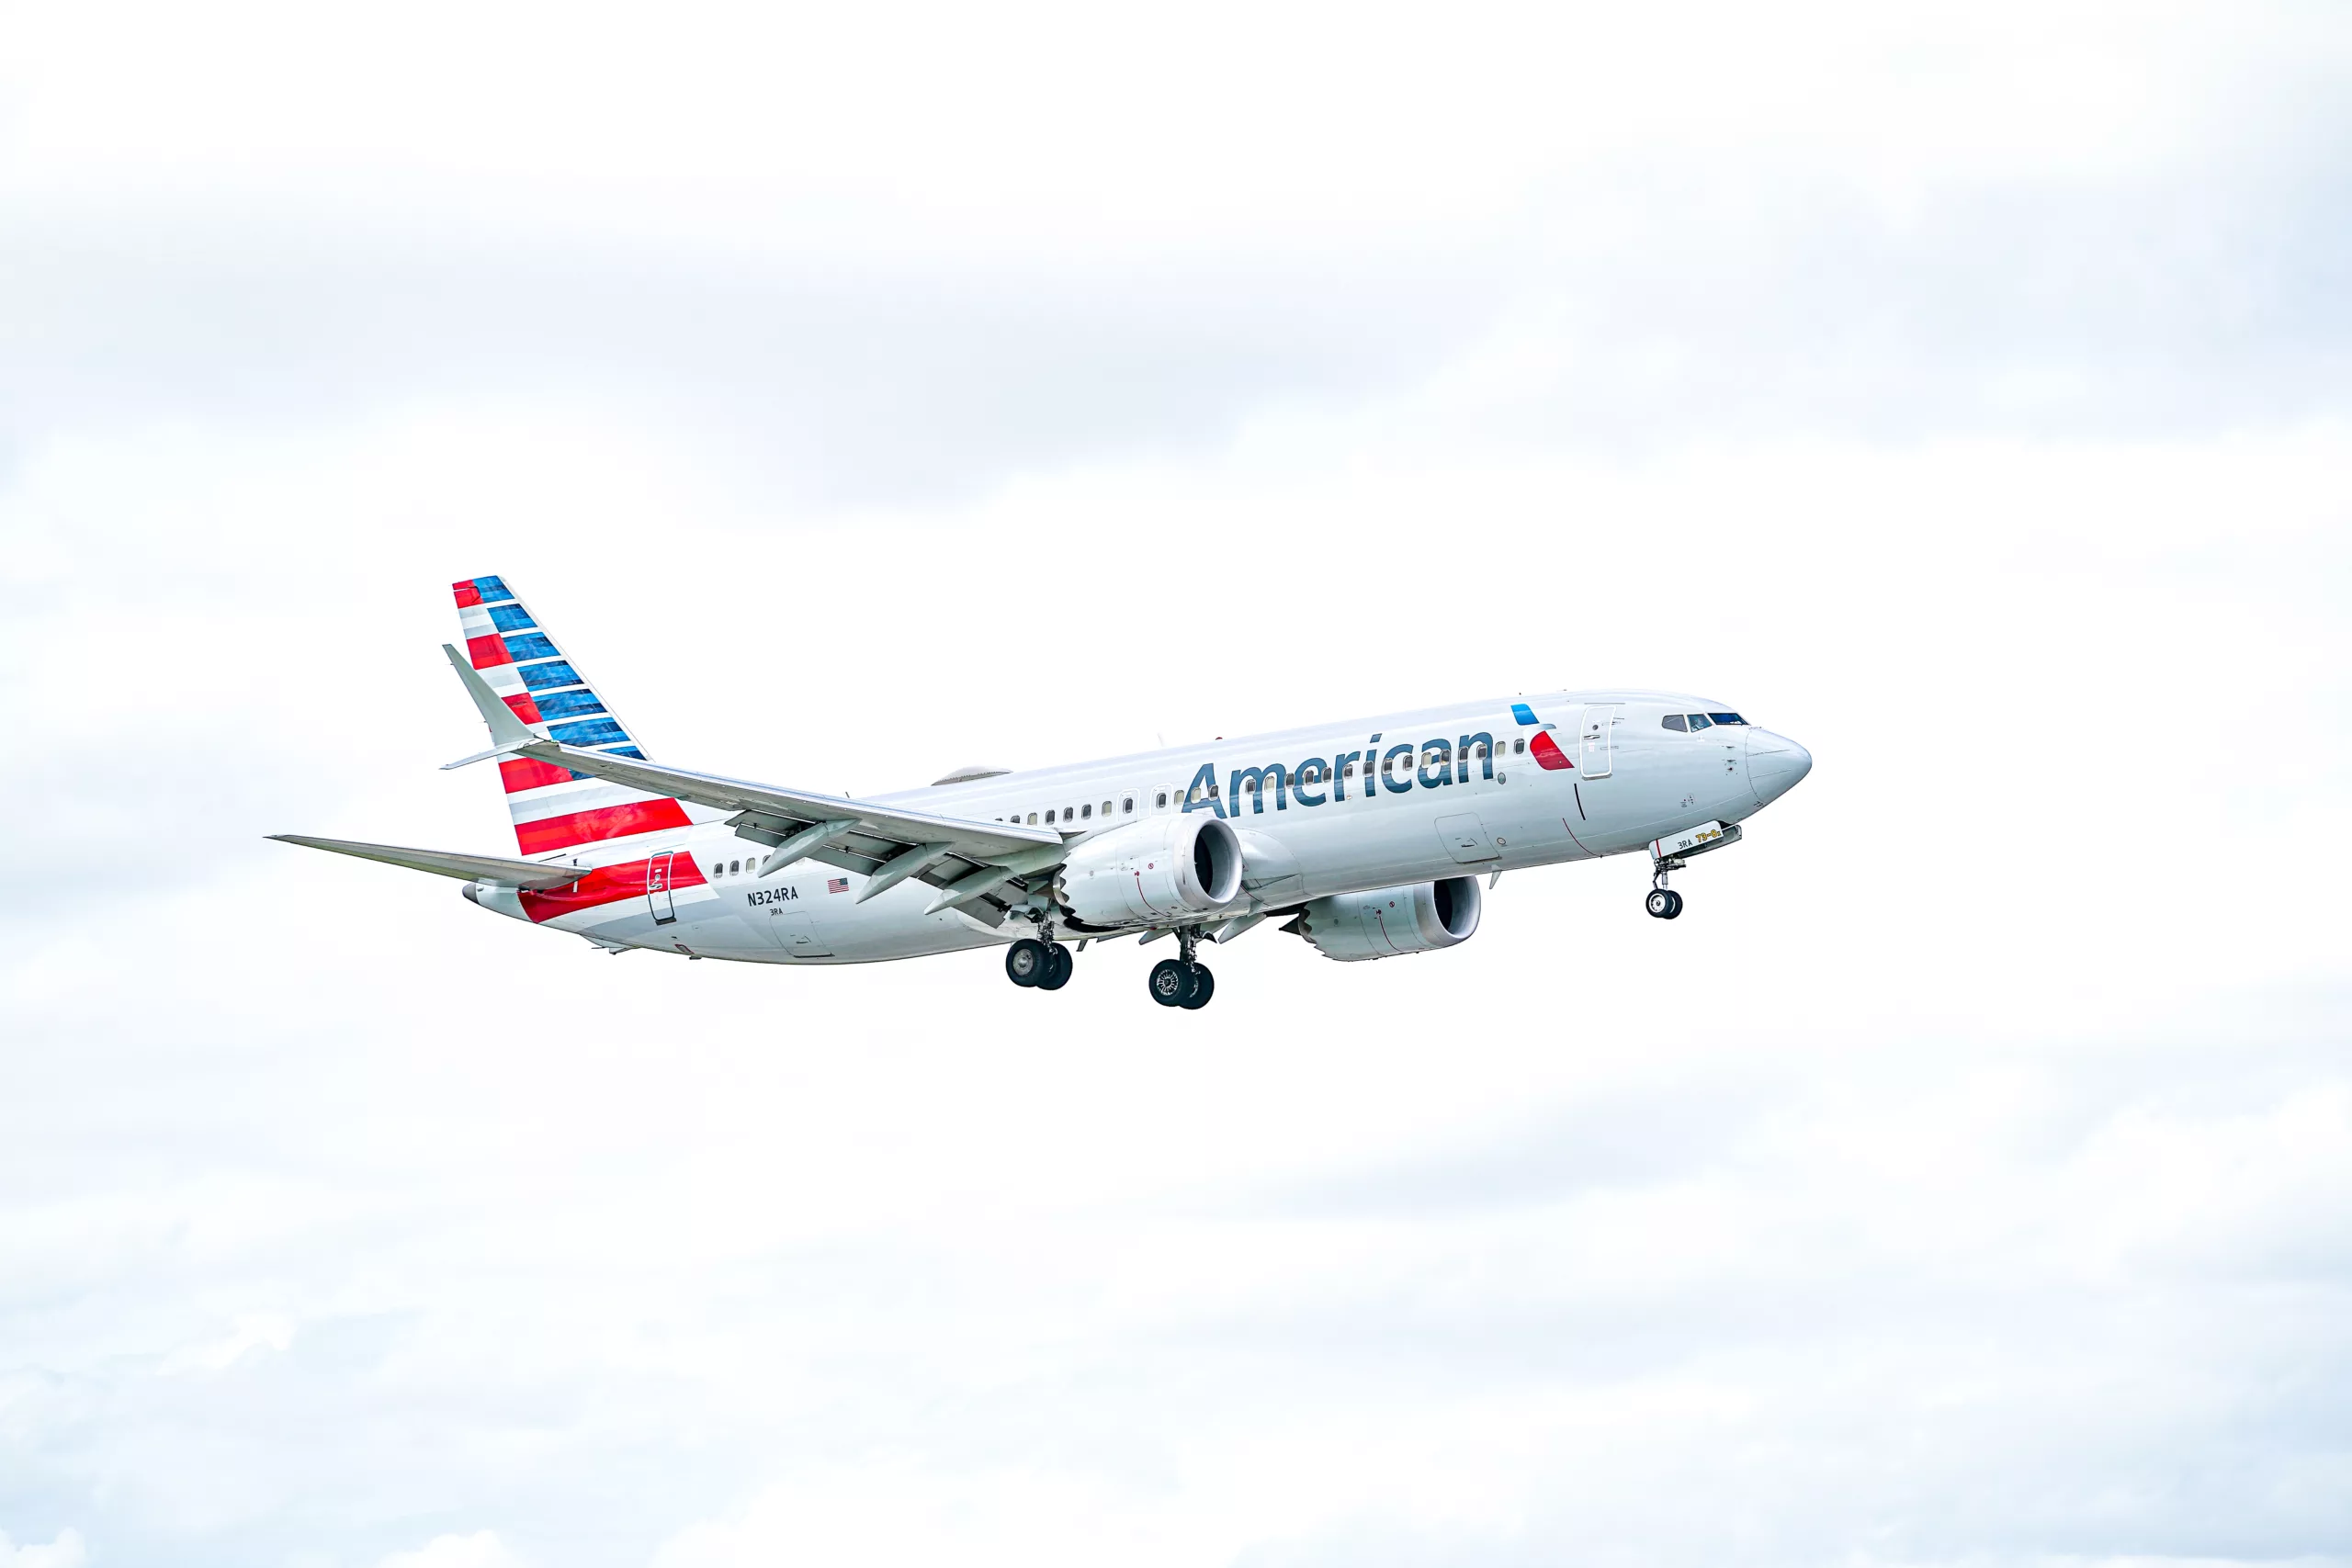 American Airlines to Discontinue Miami-Tel Aviv Route in March 2023